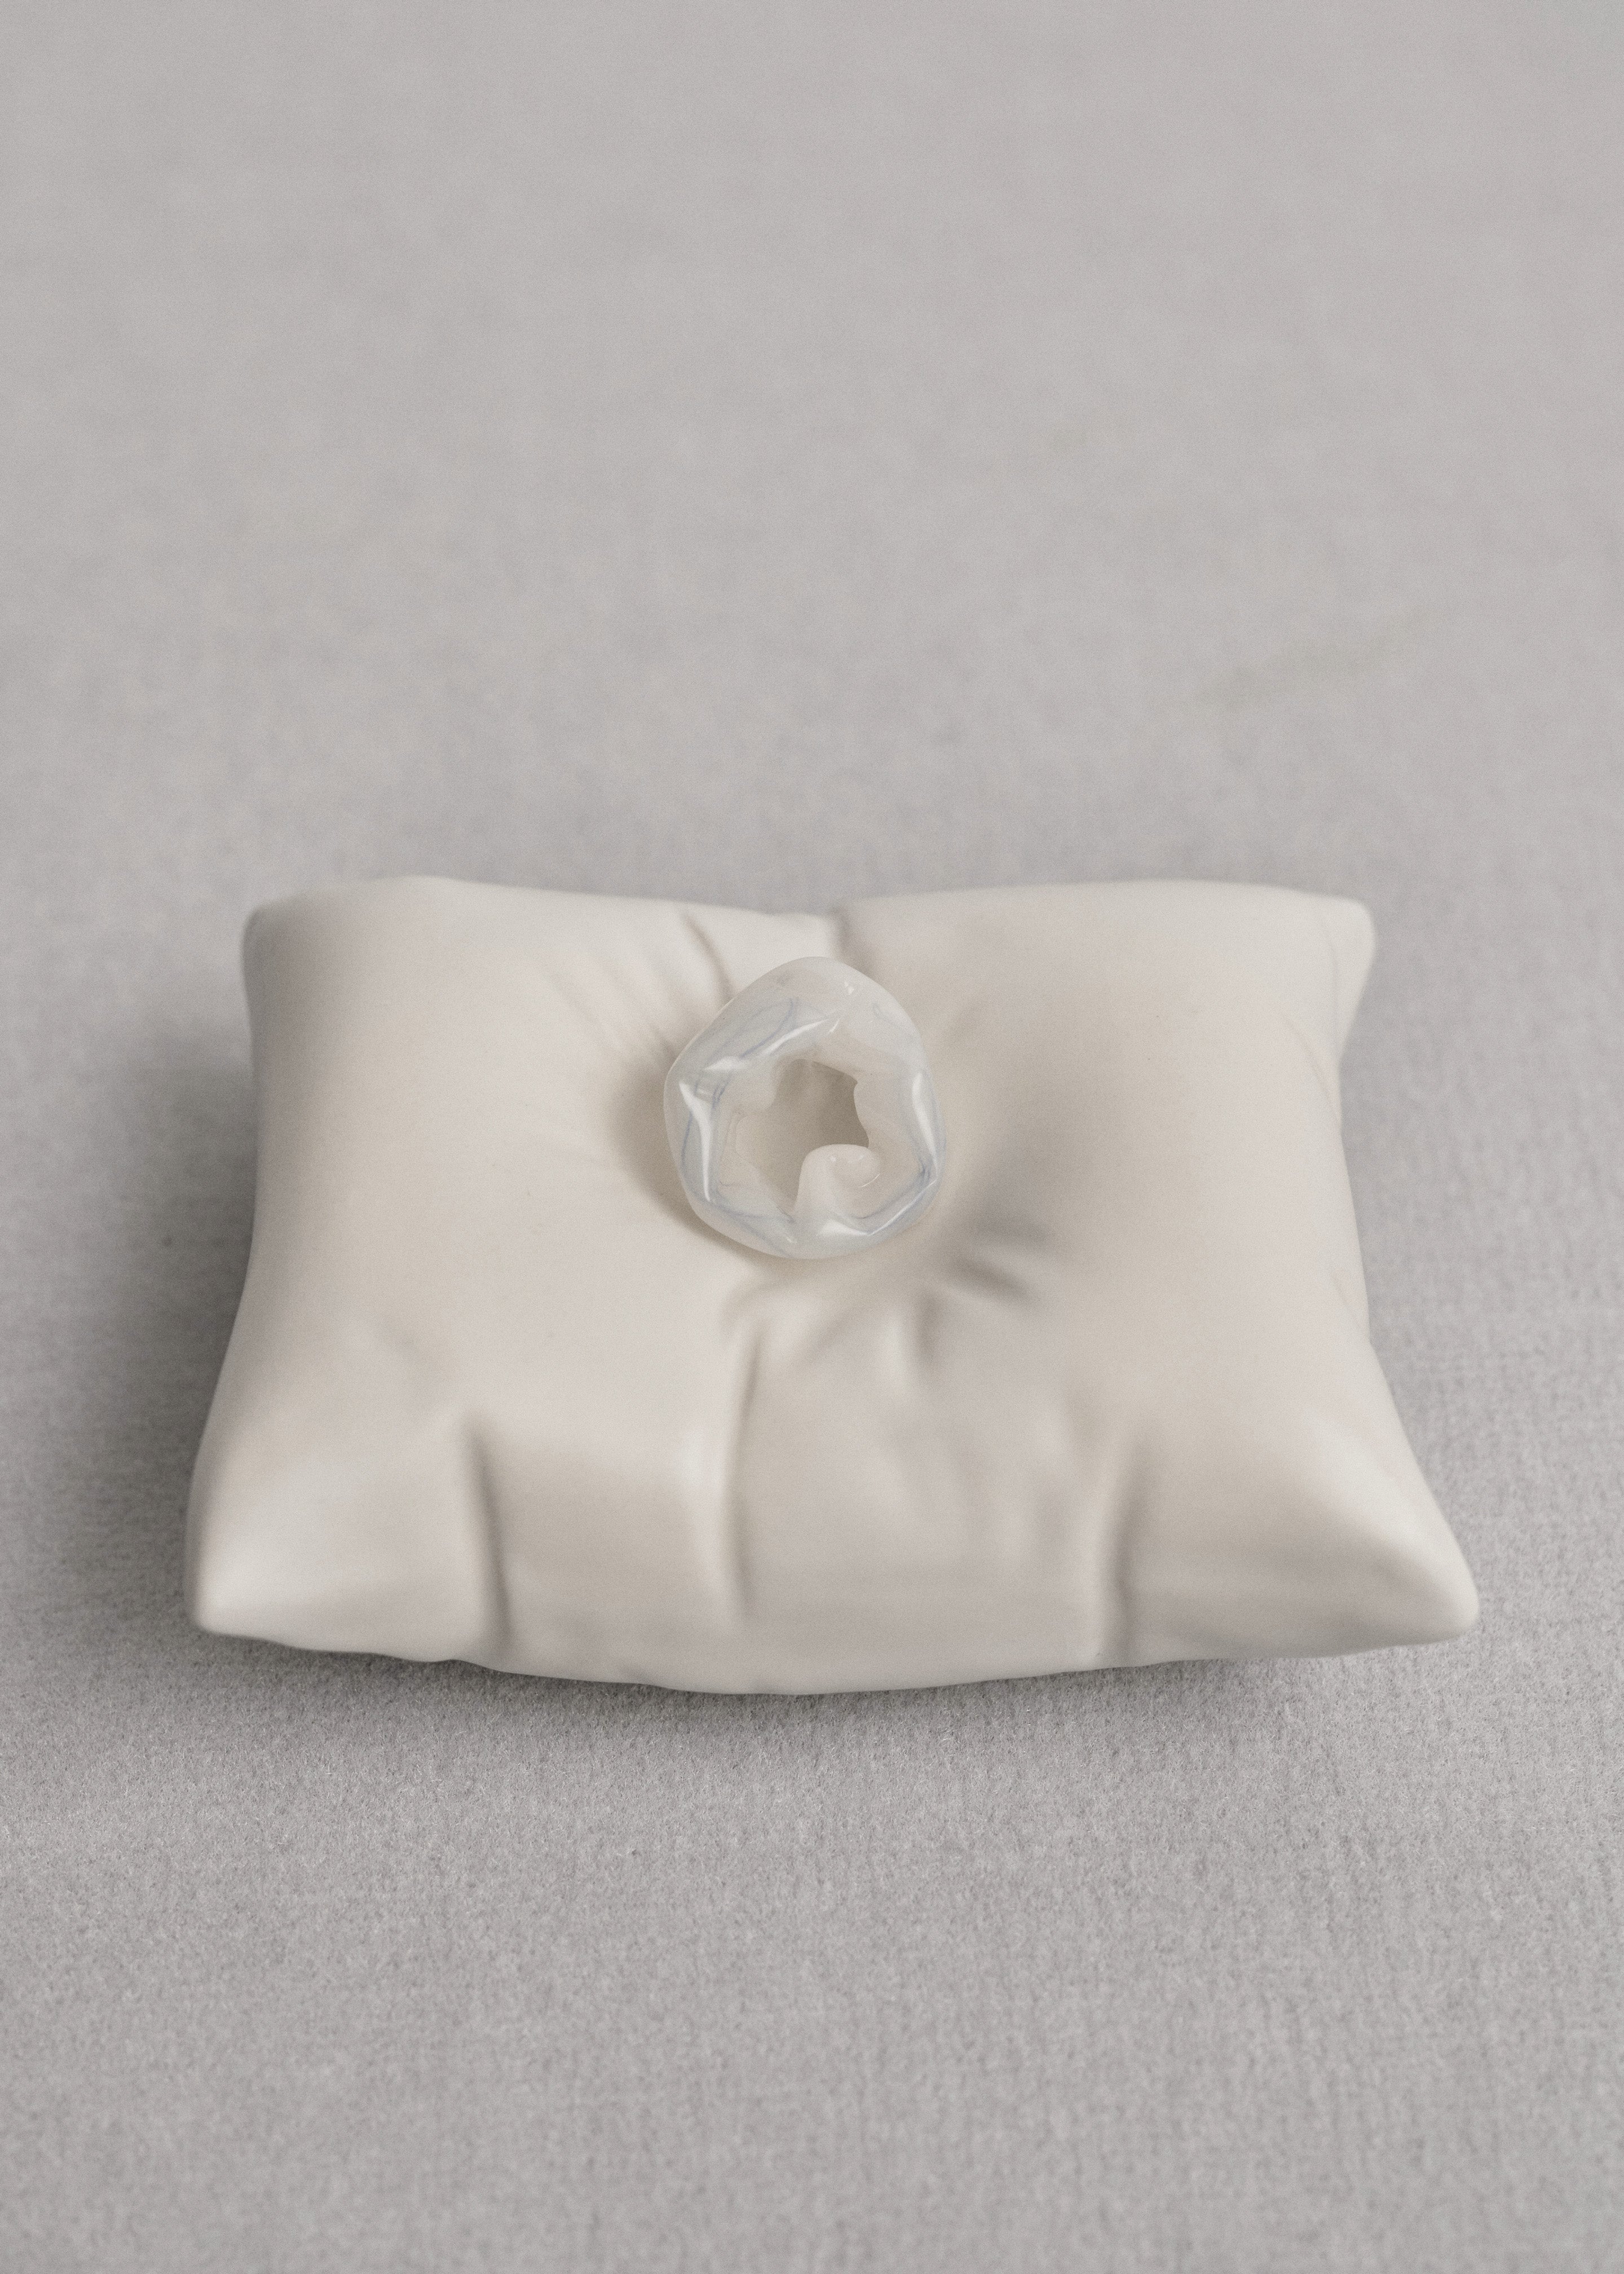 Completedworks Bumped Ceramic Cushion - Matte White - 1